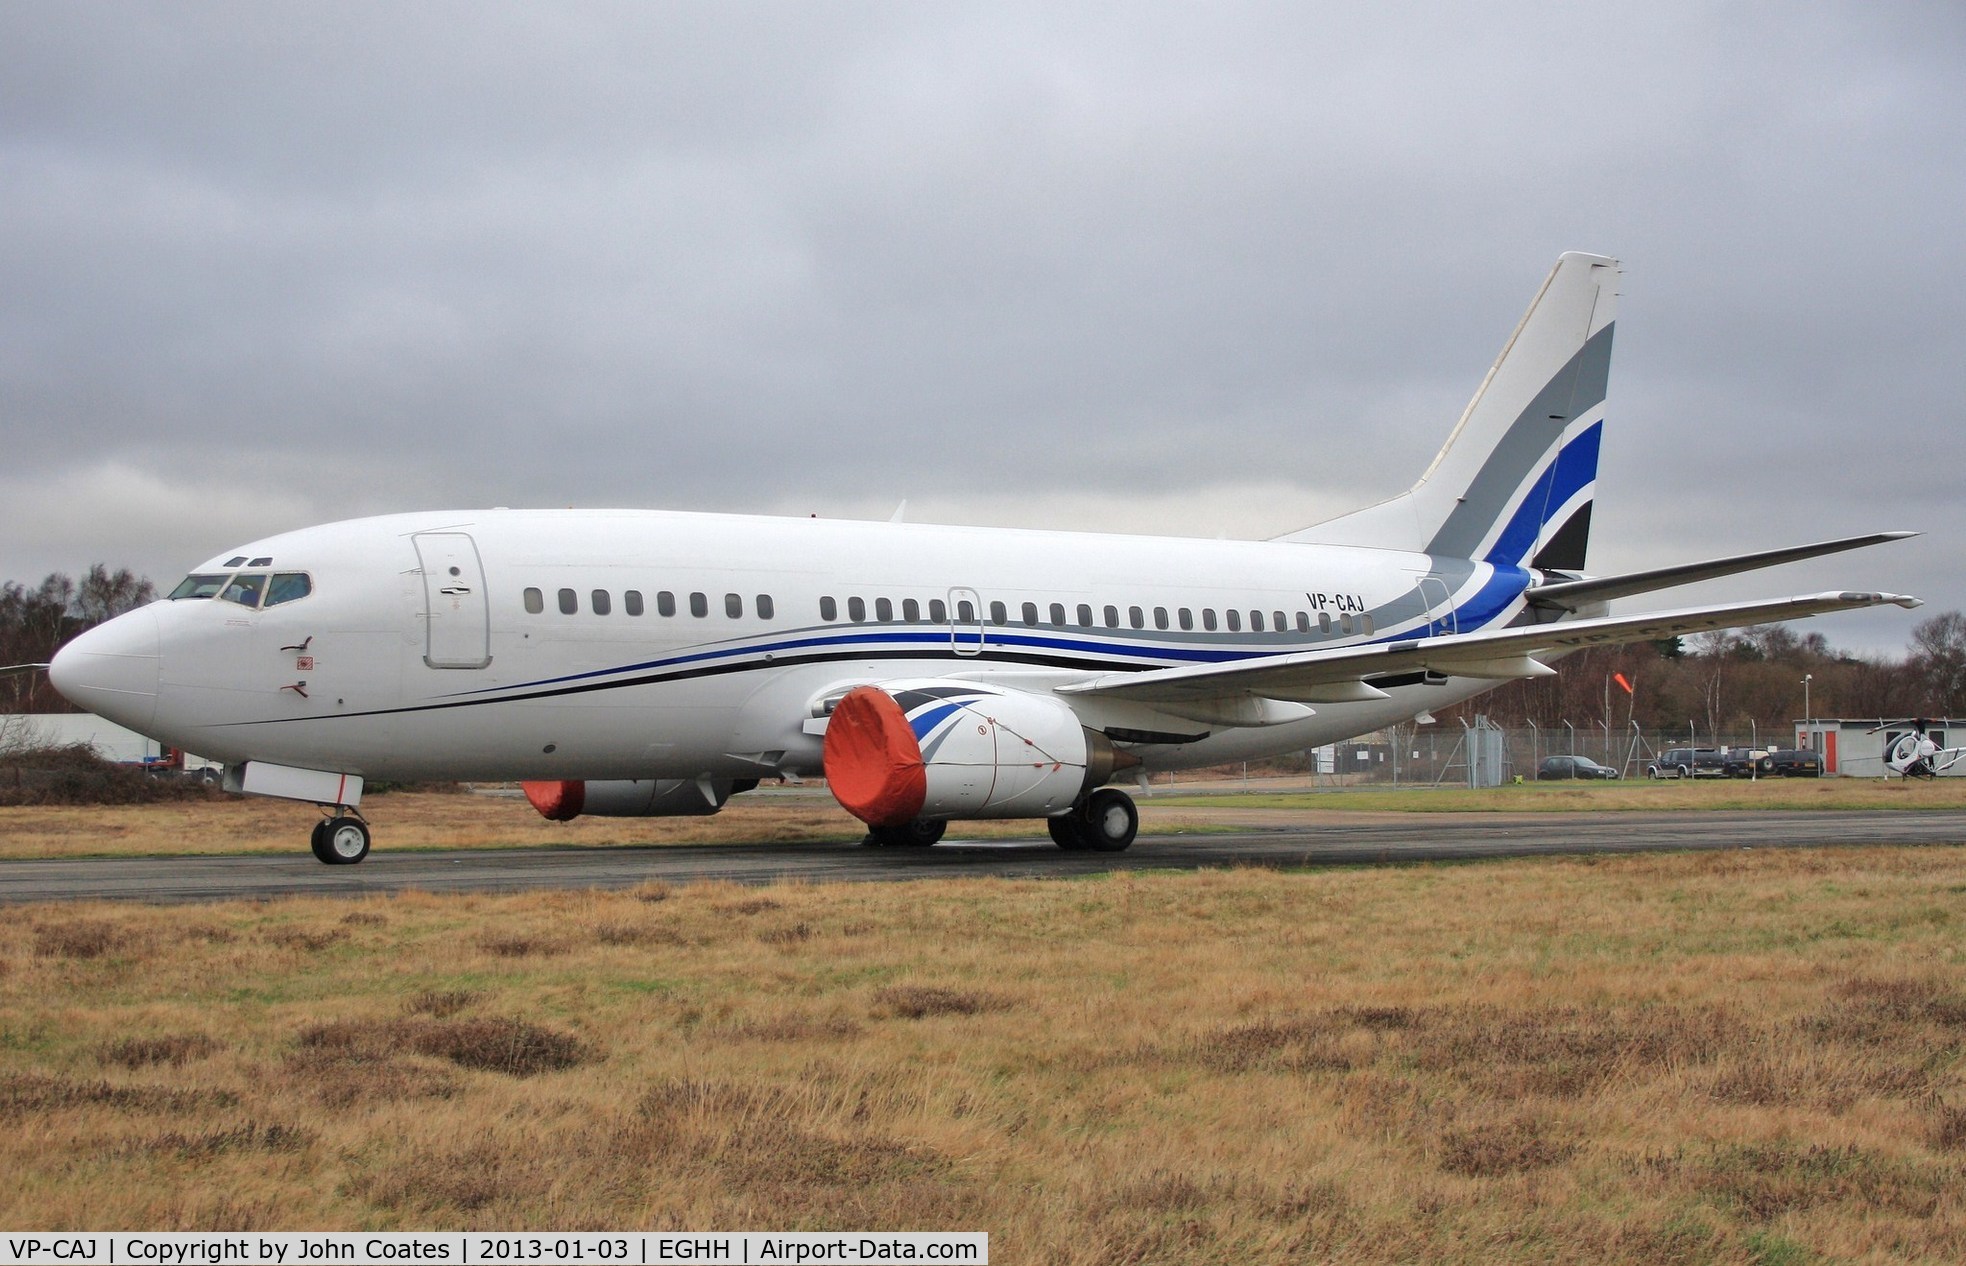 VP-CAJ, 1992 Boeing 737-505 C/N 24648, Home for Christmas and New Year 2013